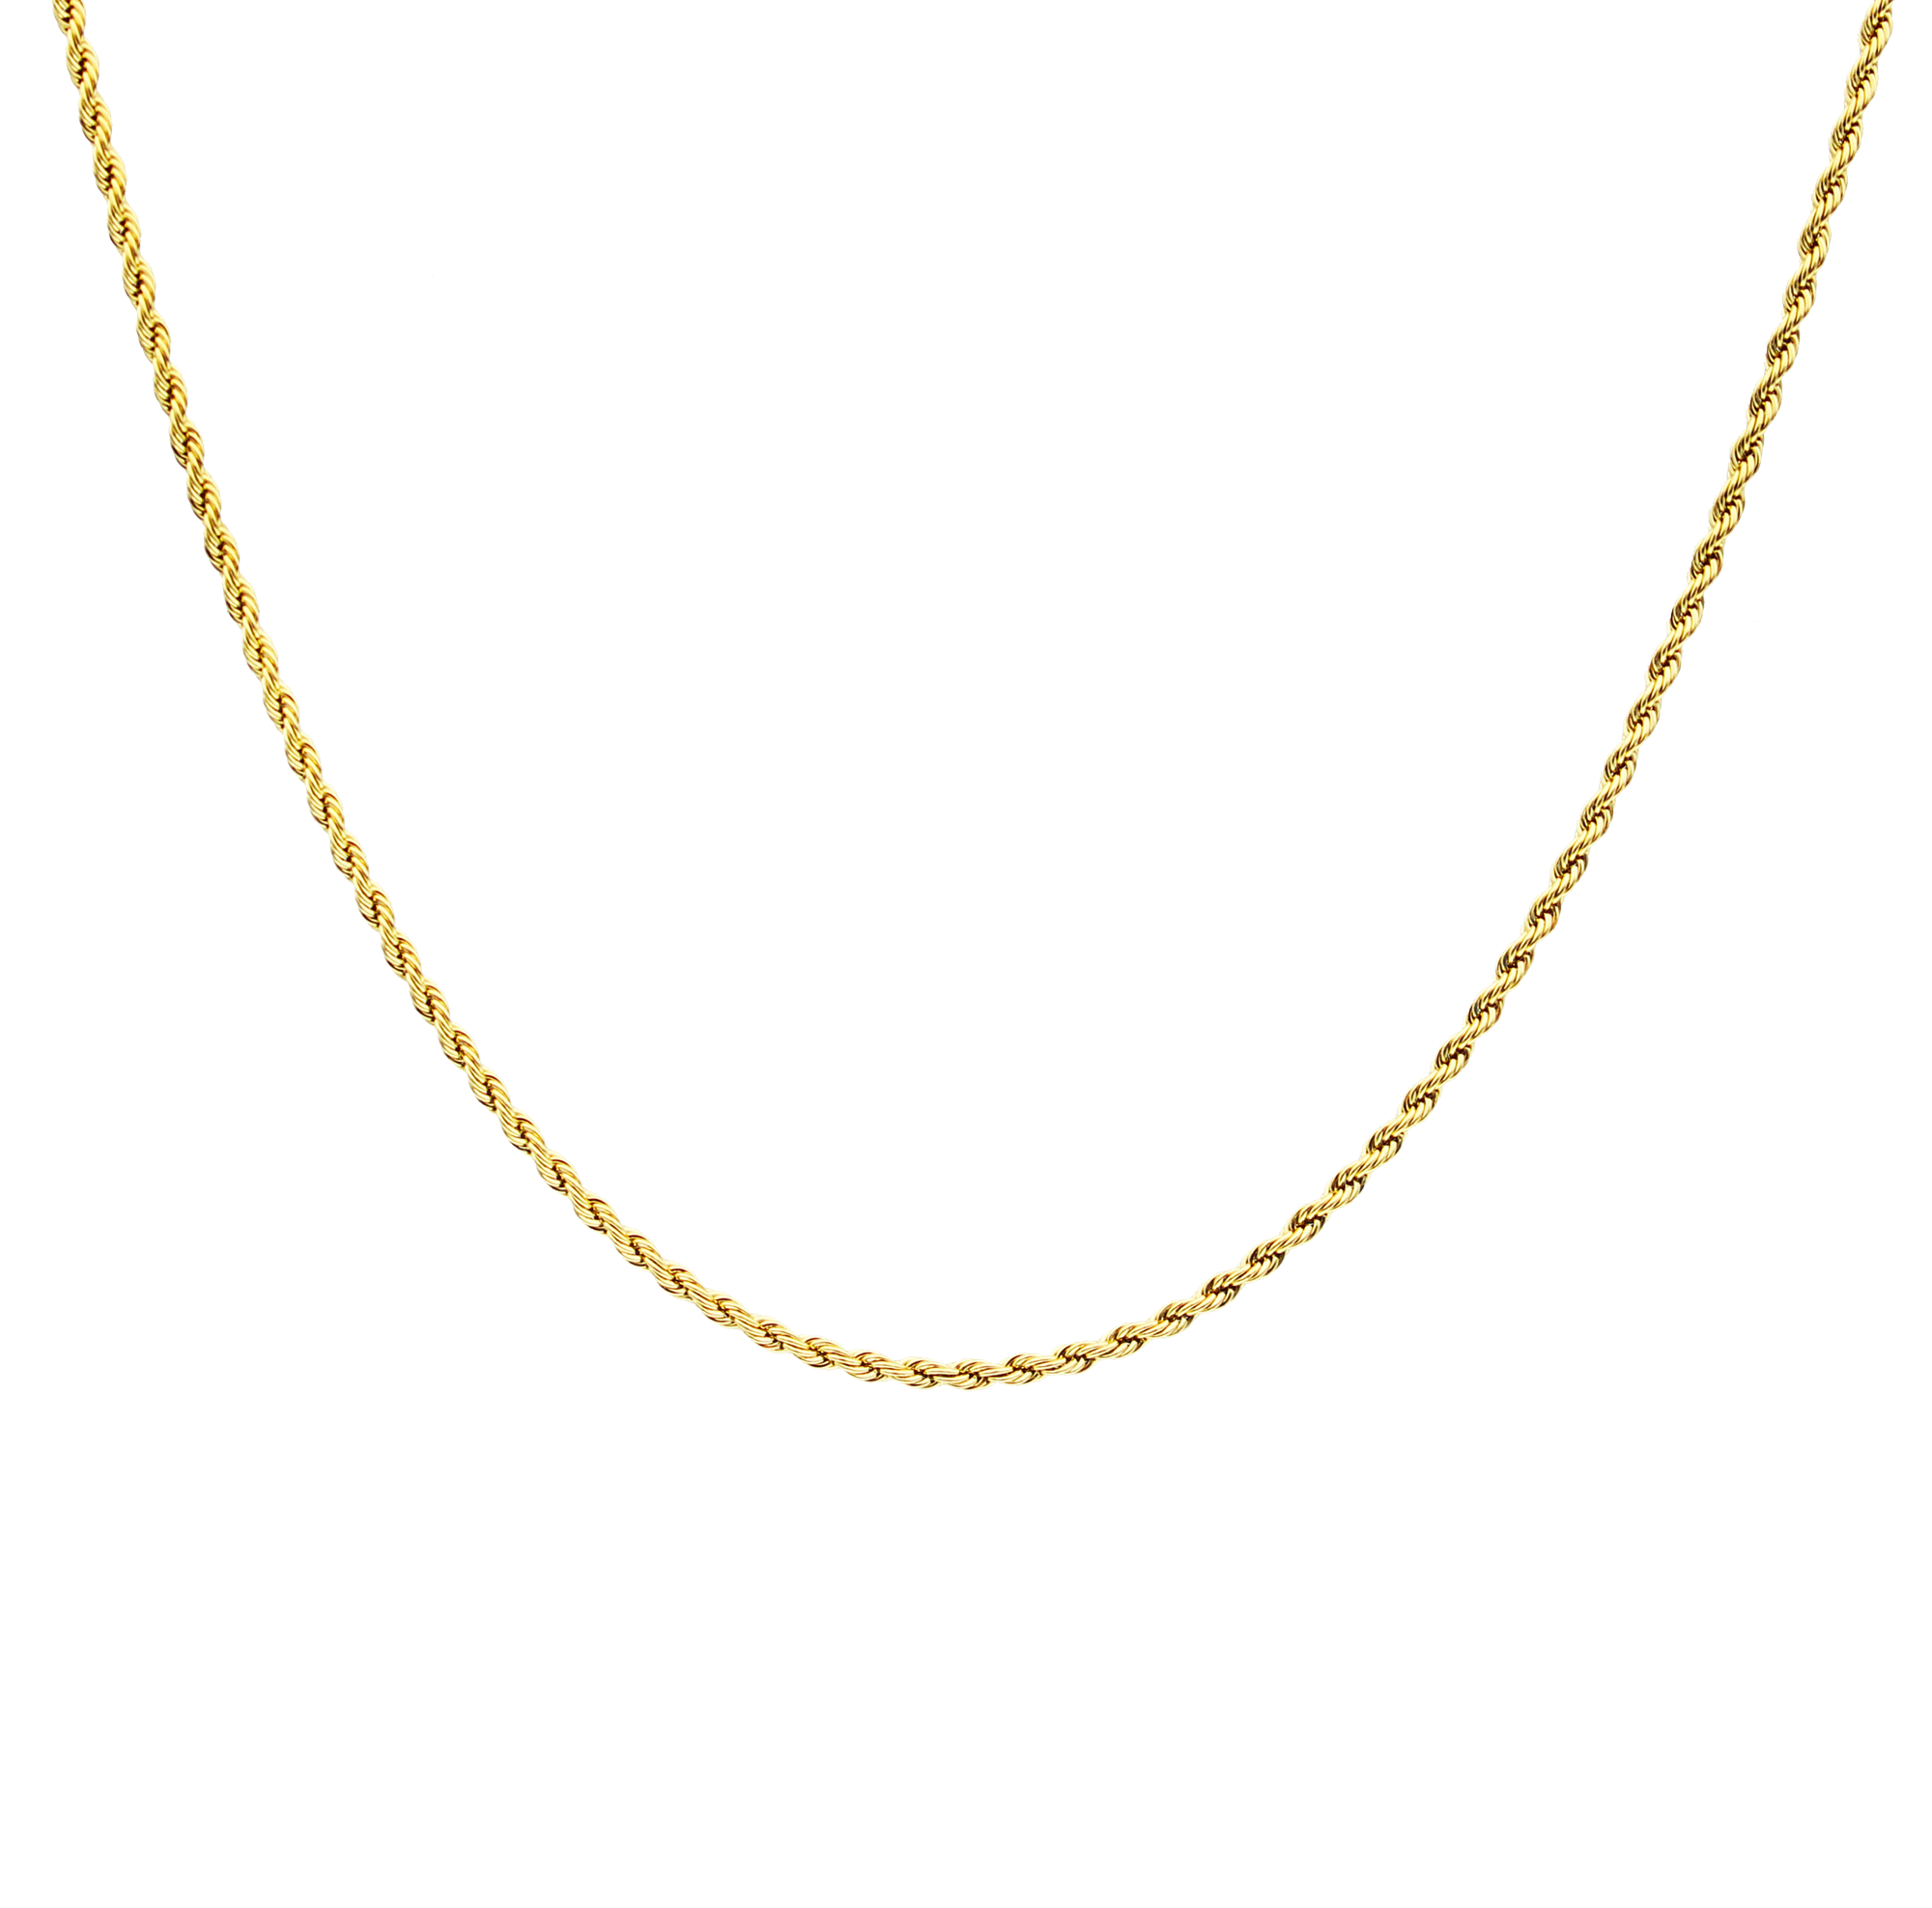 FJ Watches Aven necklace French rope twisted chain 18k gold women